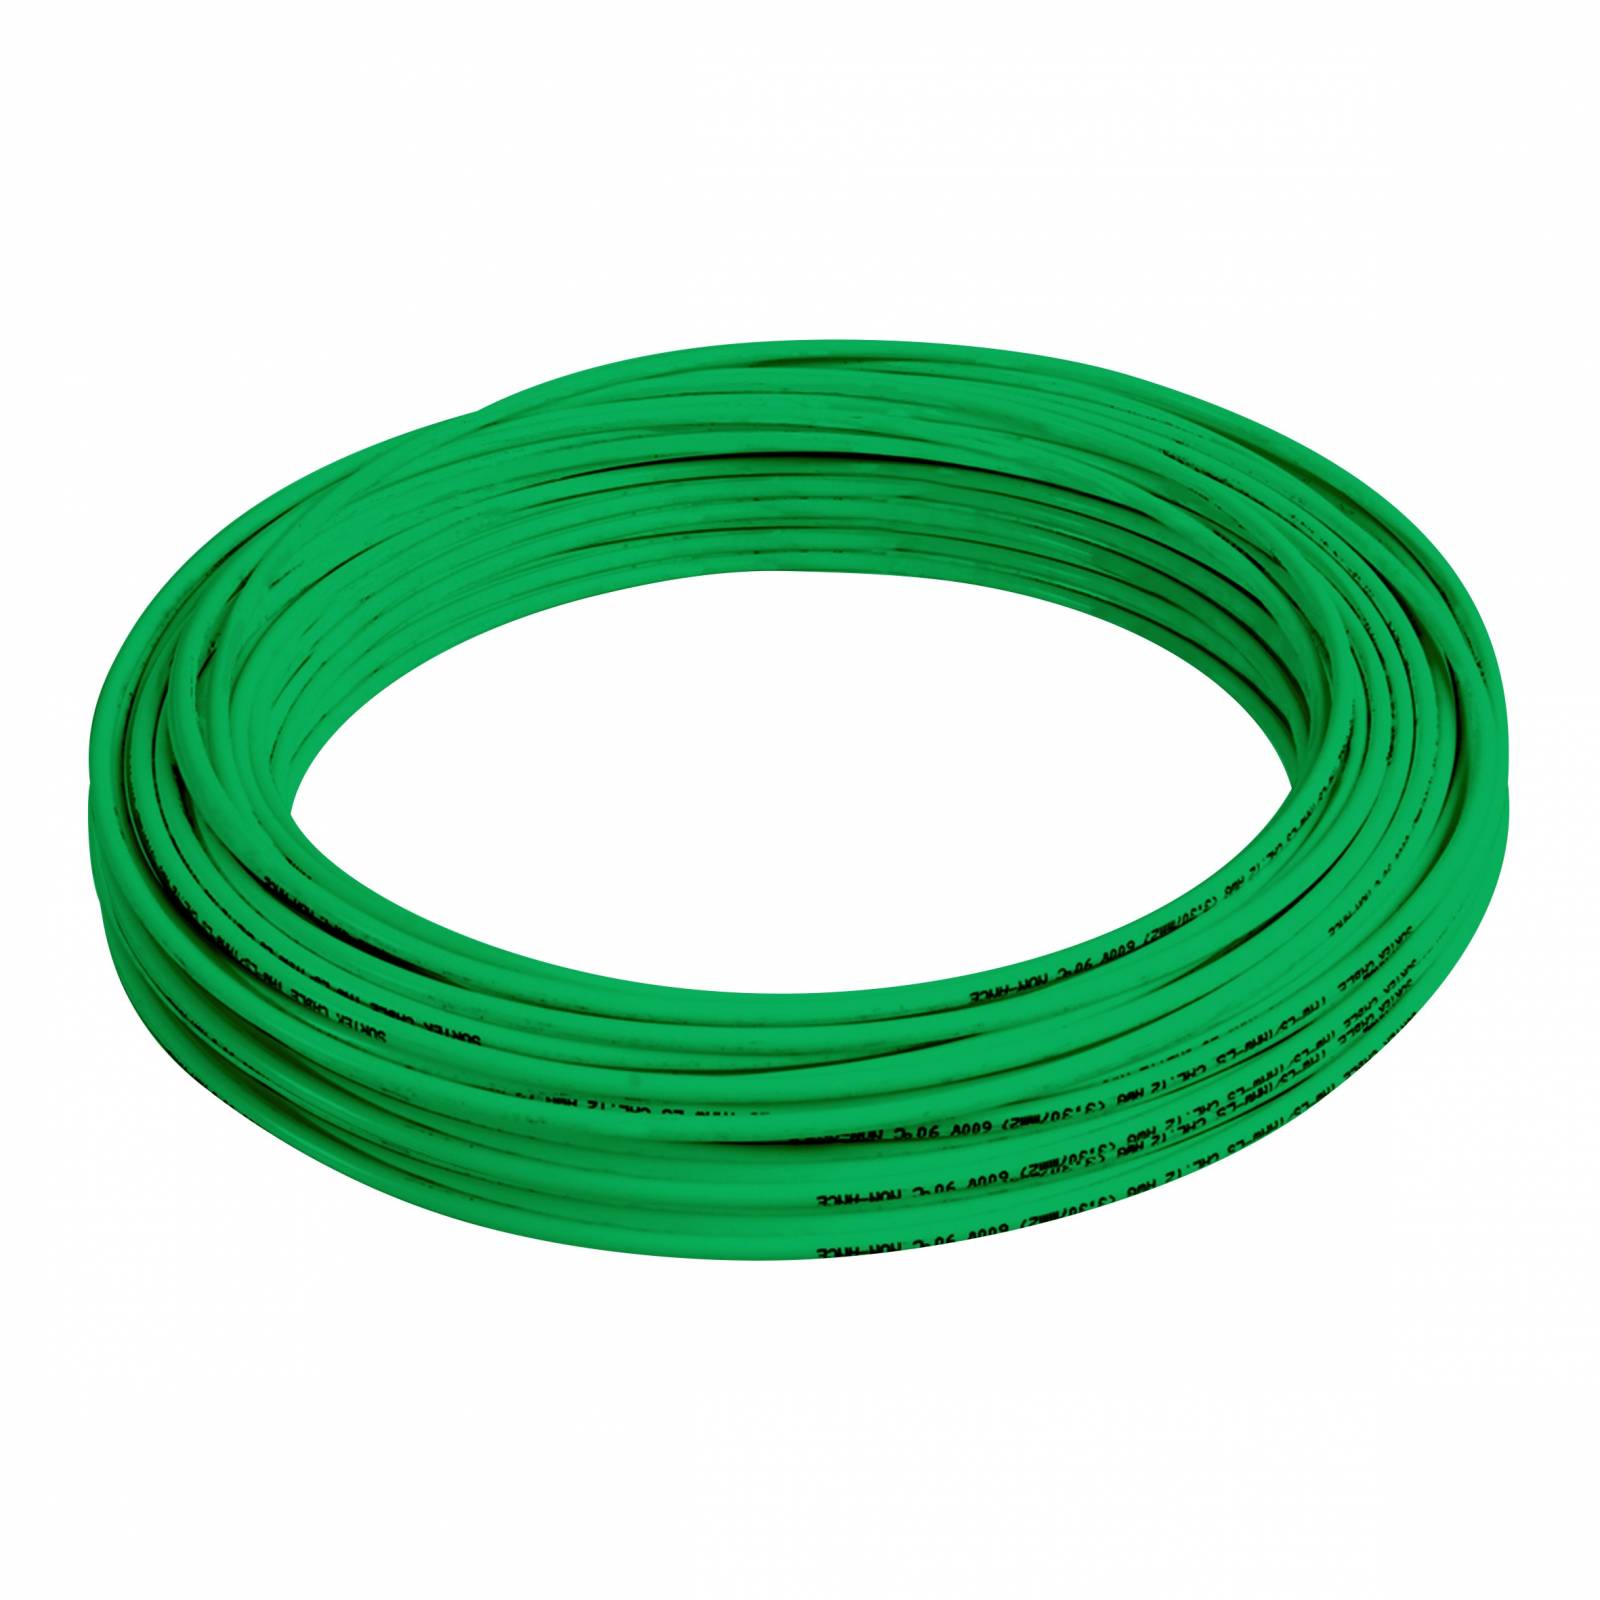 Cable Eléctrico Tipo Thw-ls/thhw-ls Cal.12 100m Verde 136920 